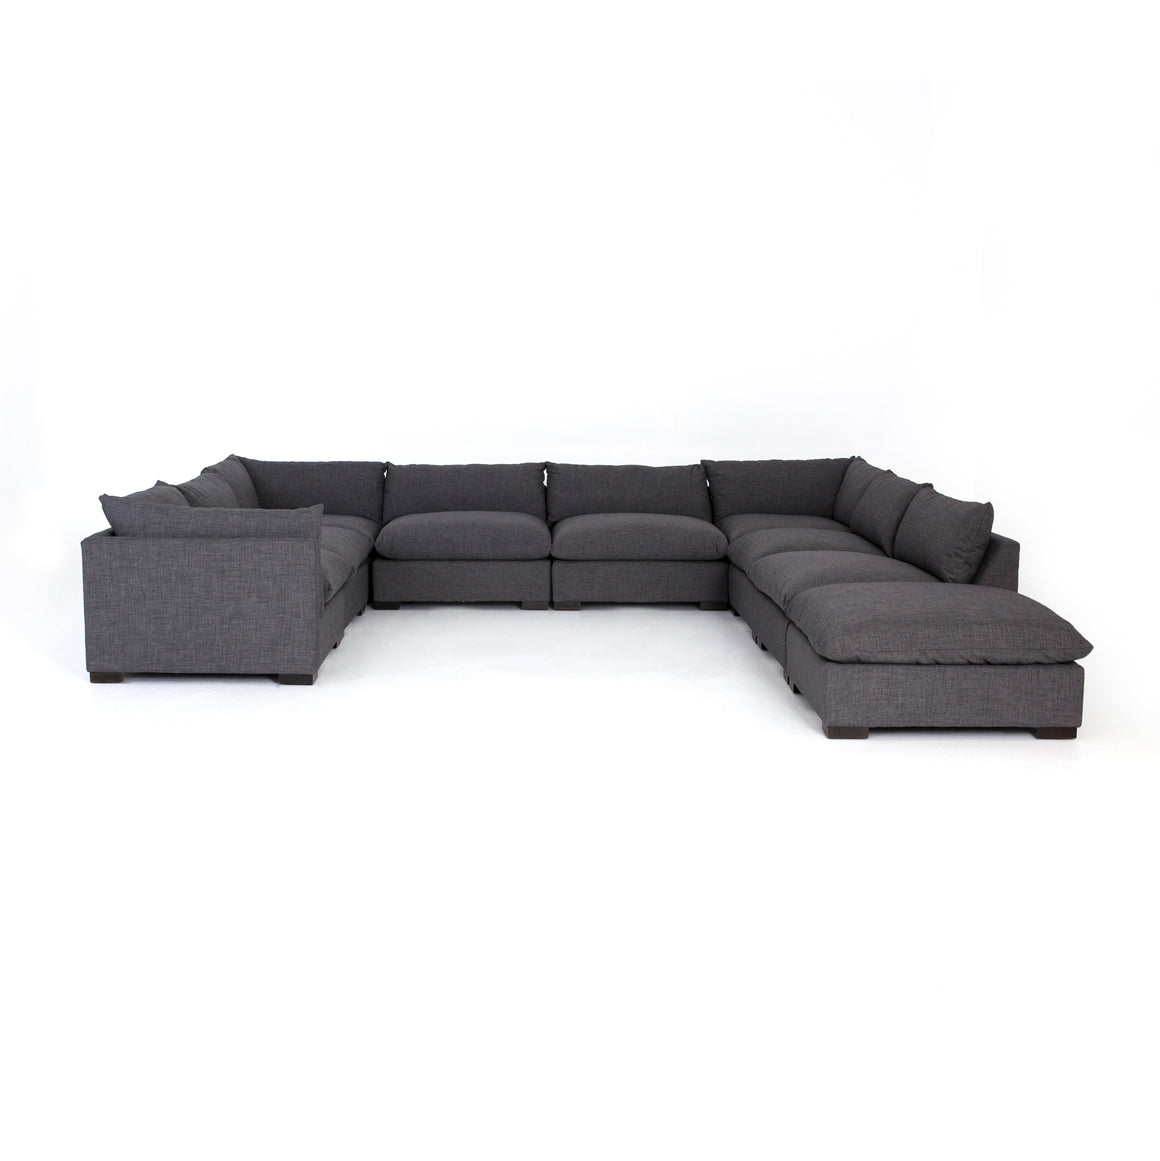 Westwood 8 Piece Sectional With Ottoman Bennett Charcoal